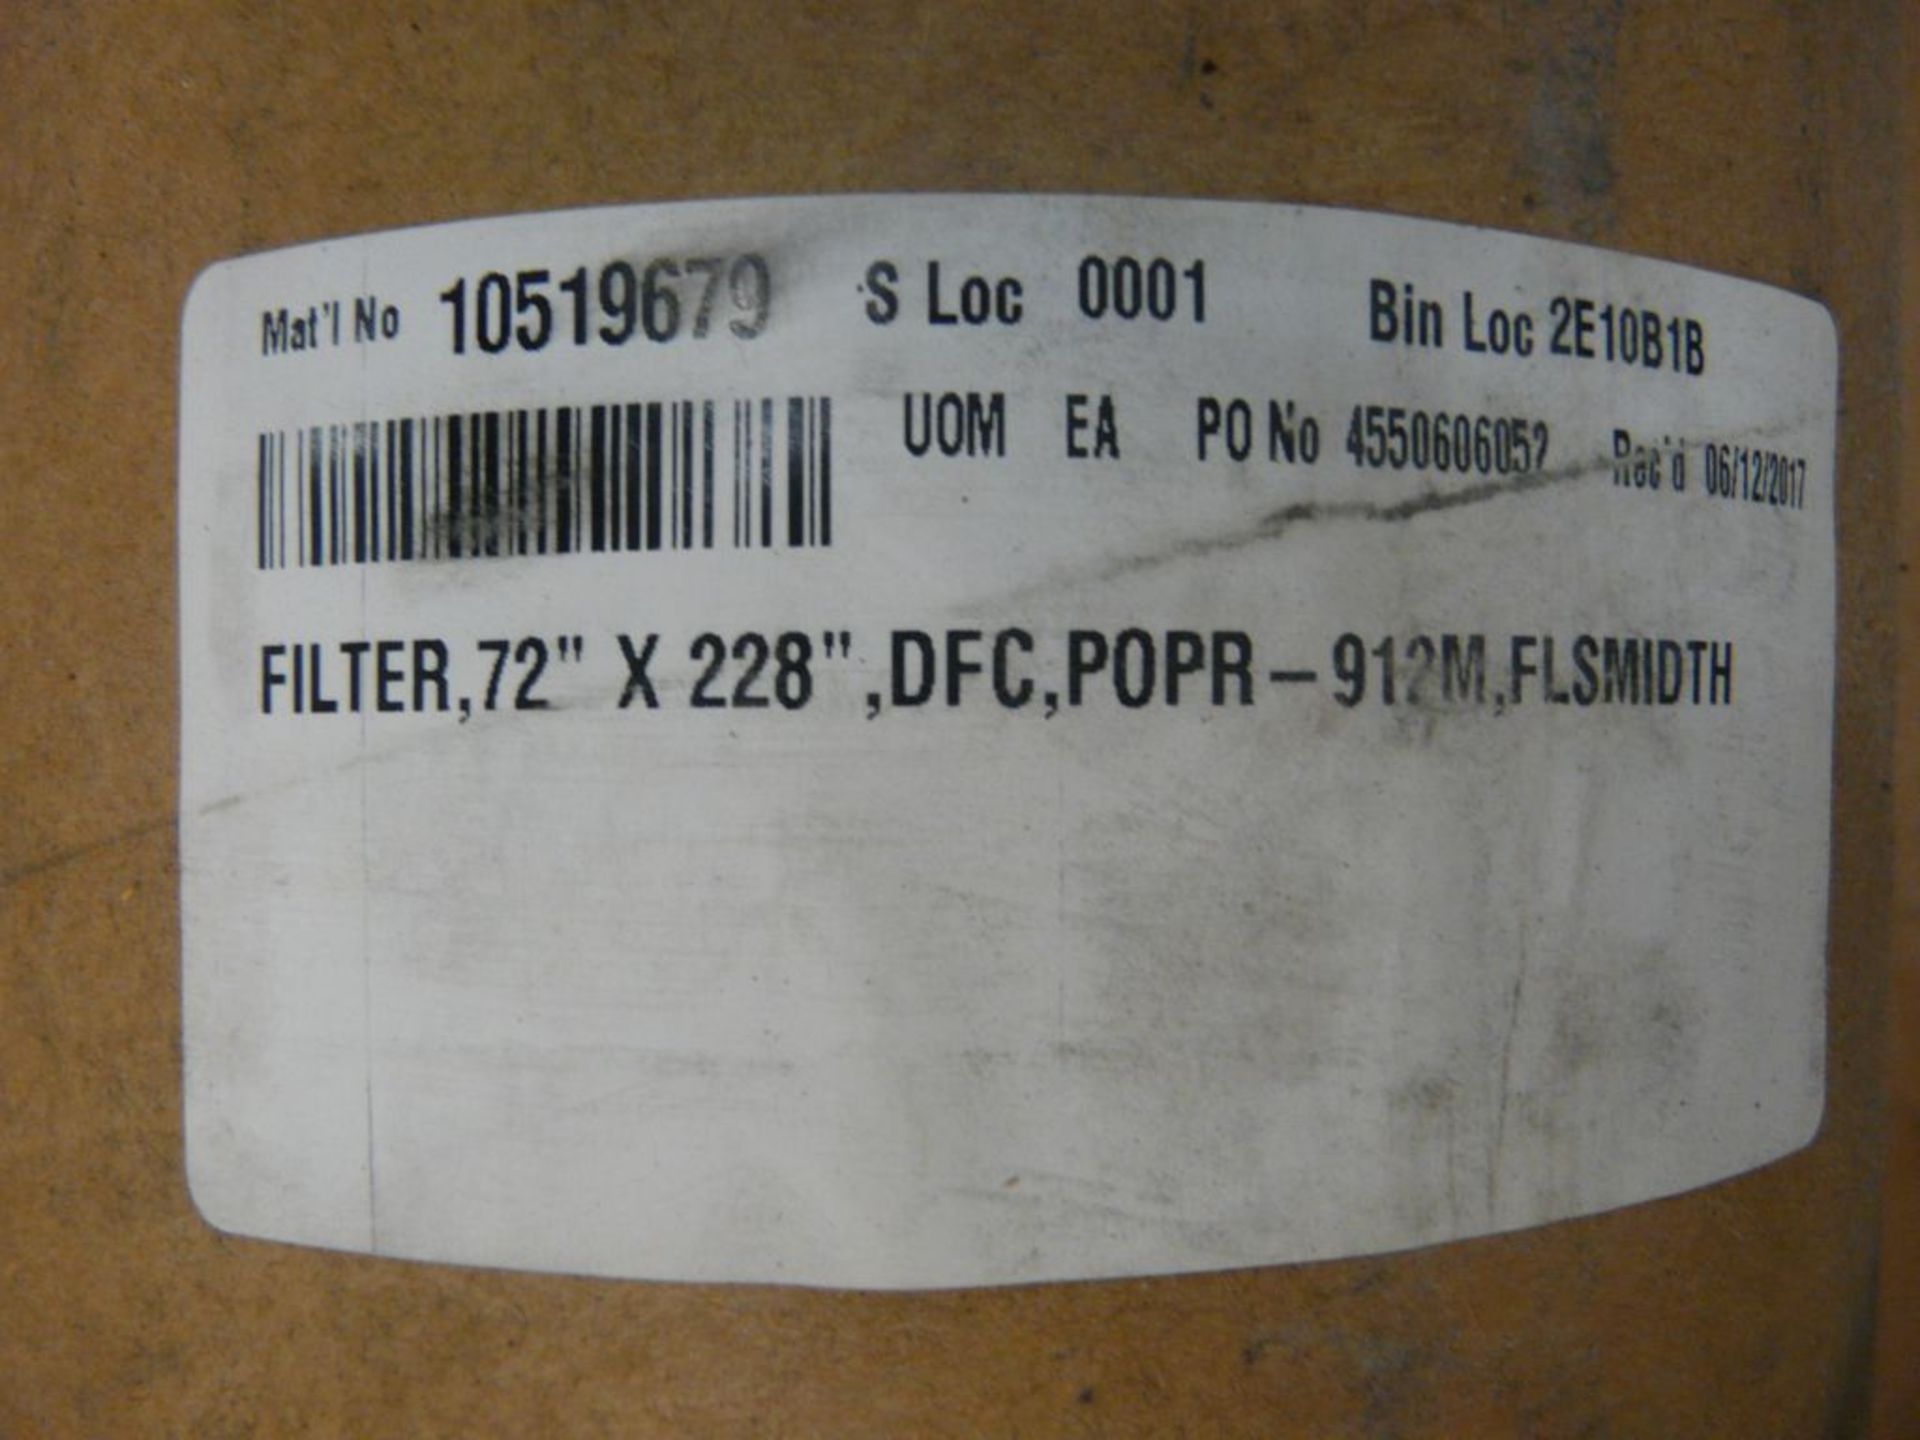 Lot of Approx (2) FL Smidth DFC Prop Filters - Part No. 912M; 72" x 228"; Tag: 216455 - Image 3 of 3